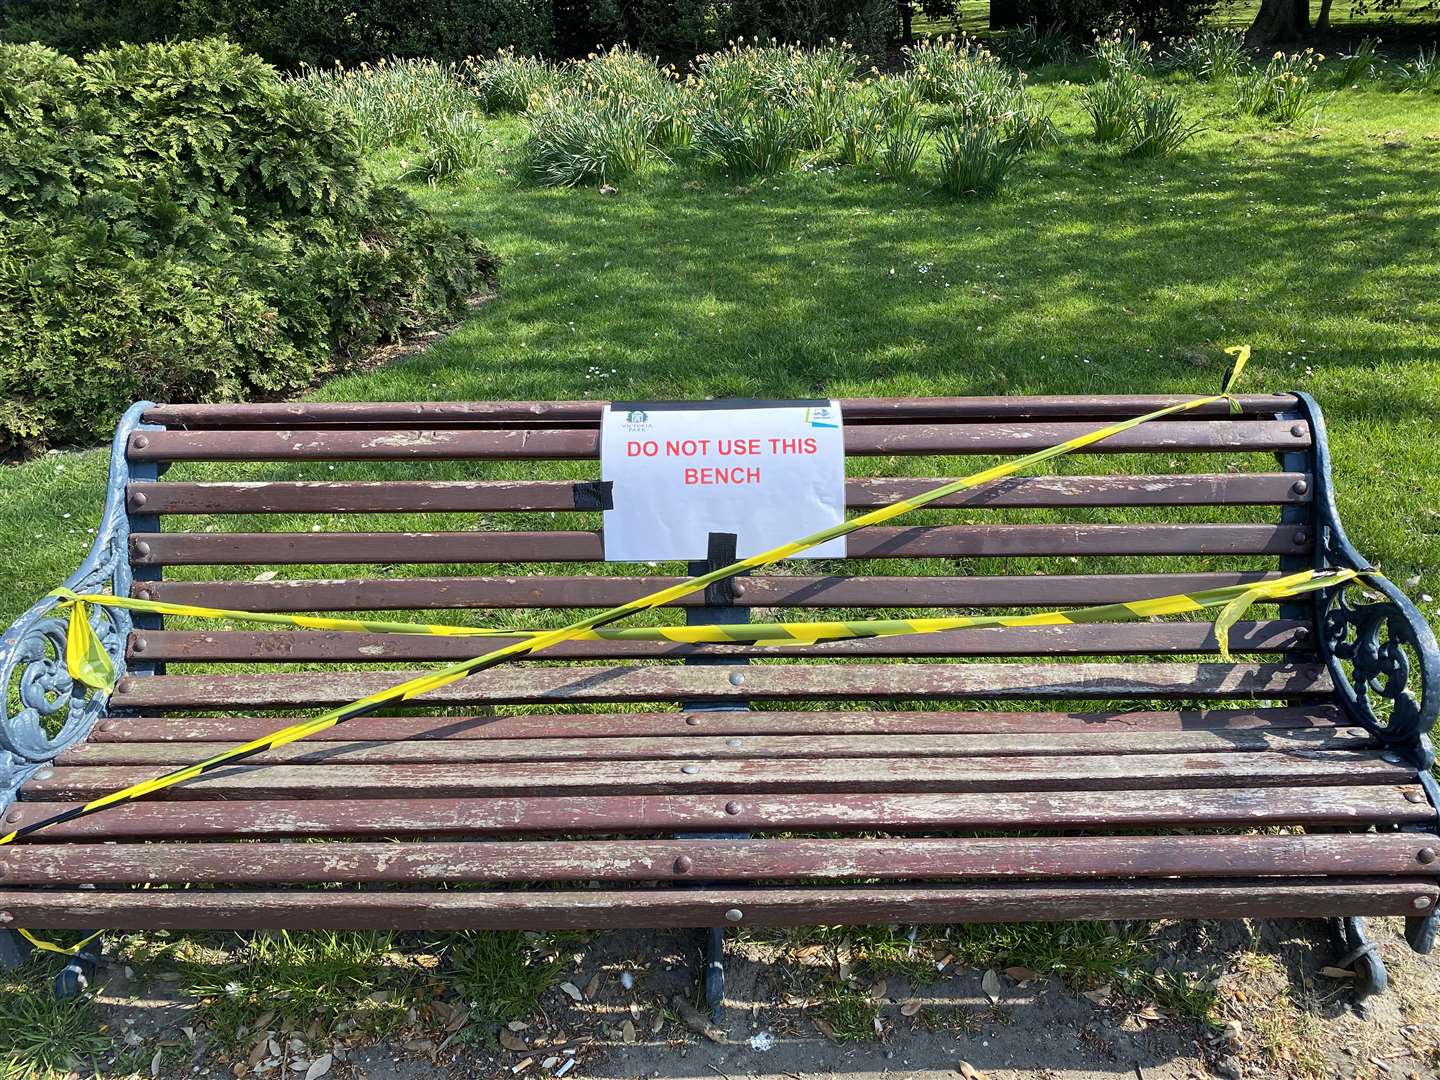 A taped-off bench in Victoria Park (Stephen Jones/PA)